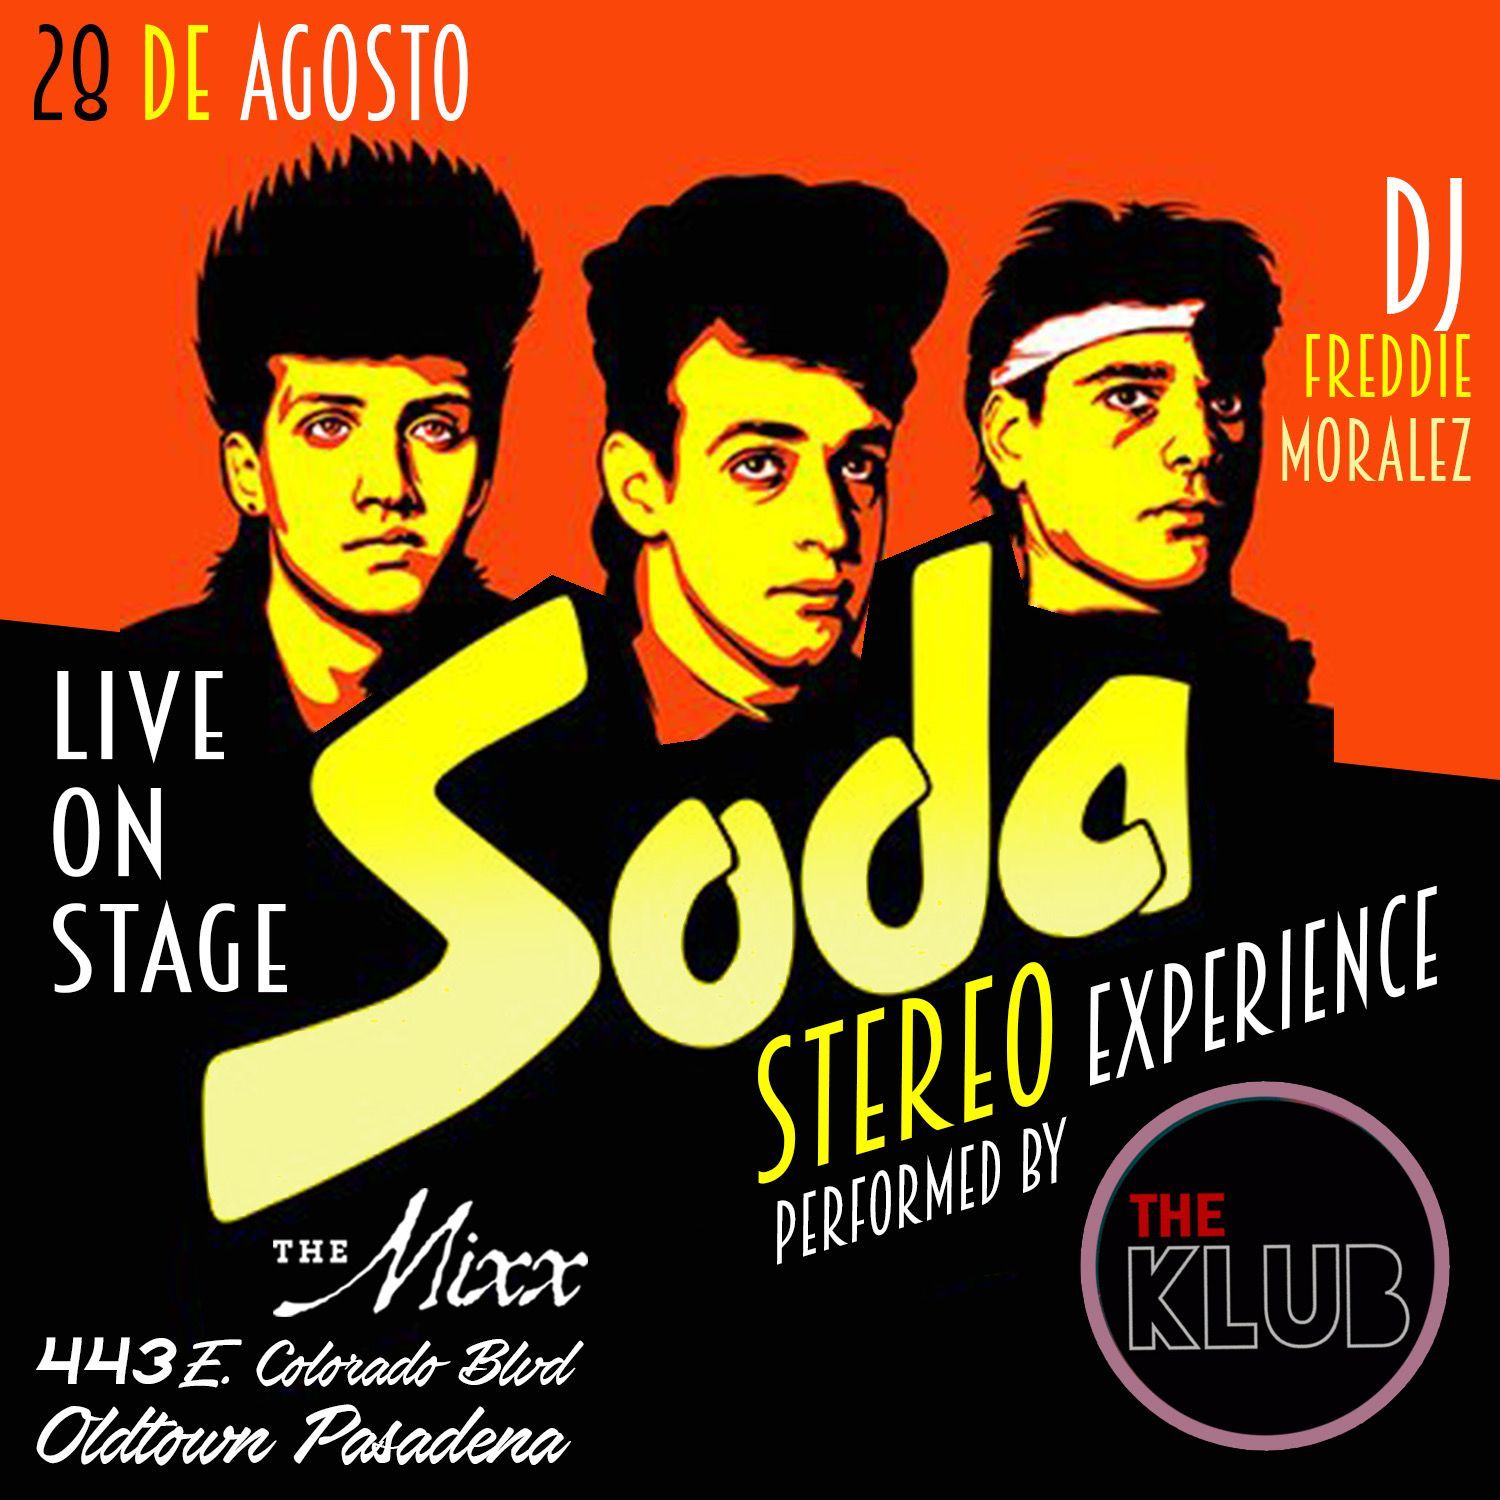 You are currently viewing Soda Stereo Experience